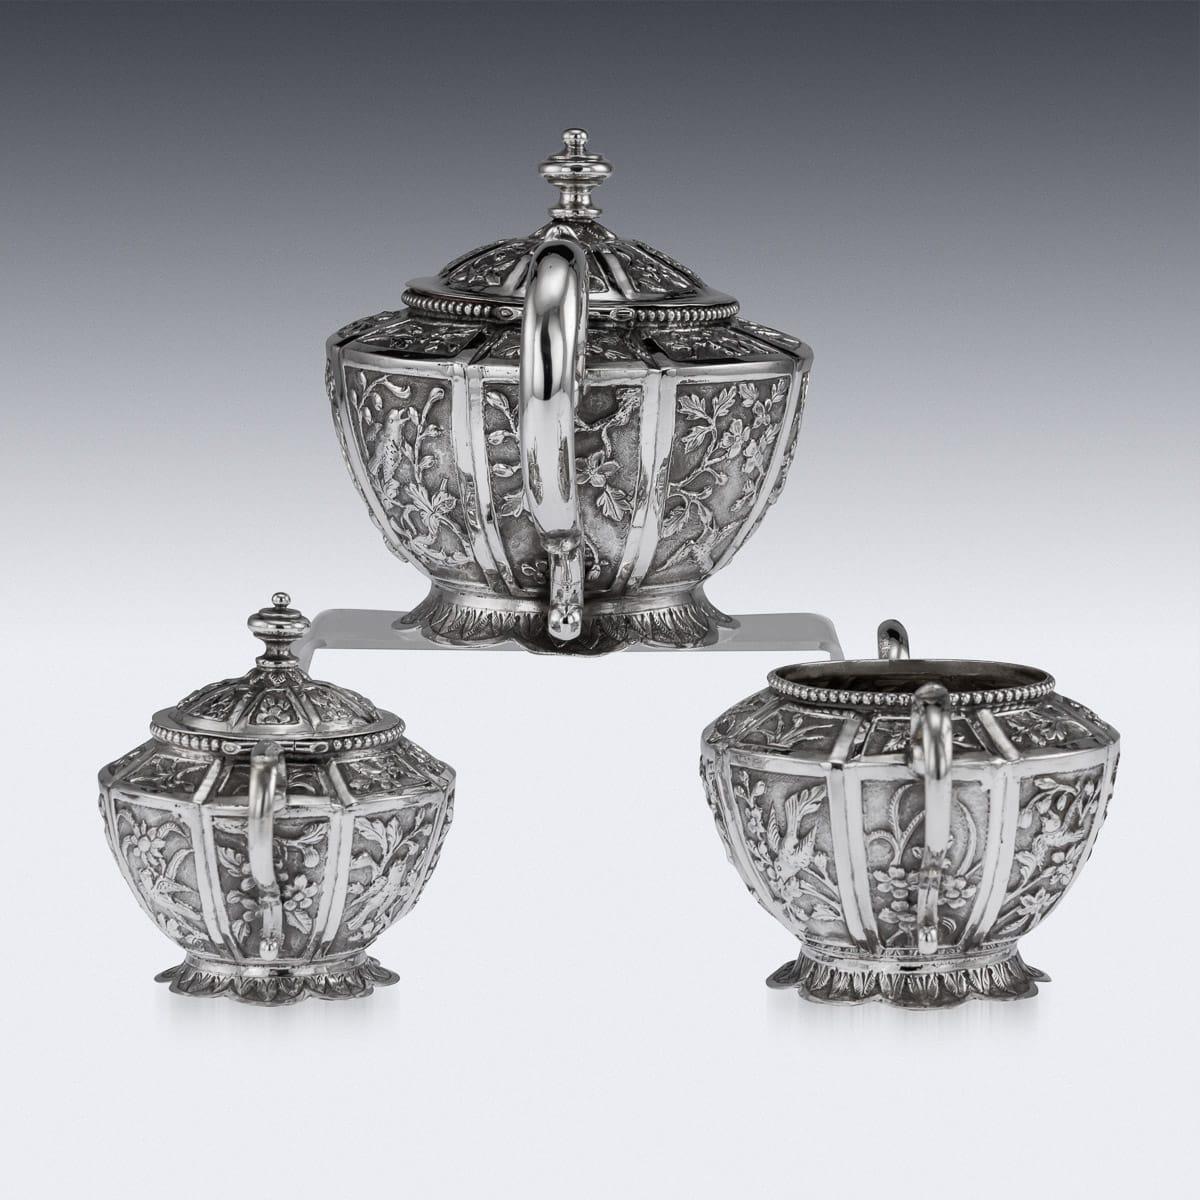 Antique early 20th century South Asian (Cambodian or Malaysian) solid silver tea set, comprising of teapot, sugar bowl and cream jug. Stunning three-piece tea set decorated with stylized floral decoration in rectangular reserves, bead boarders and